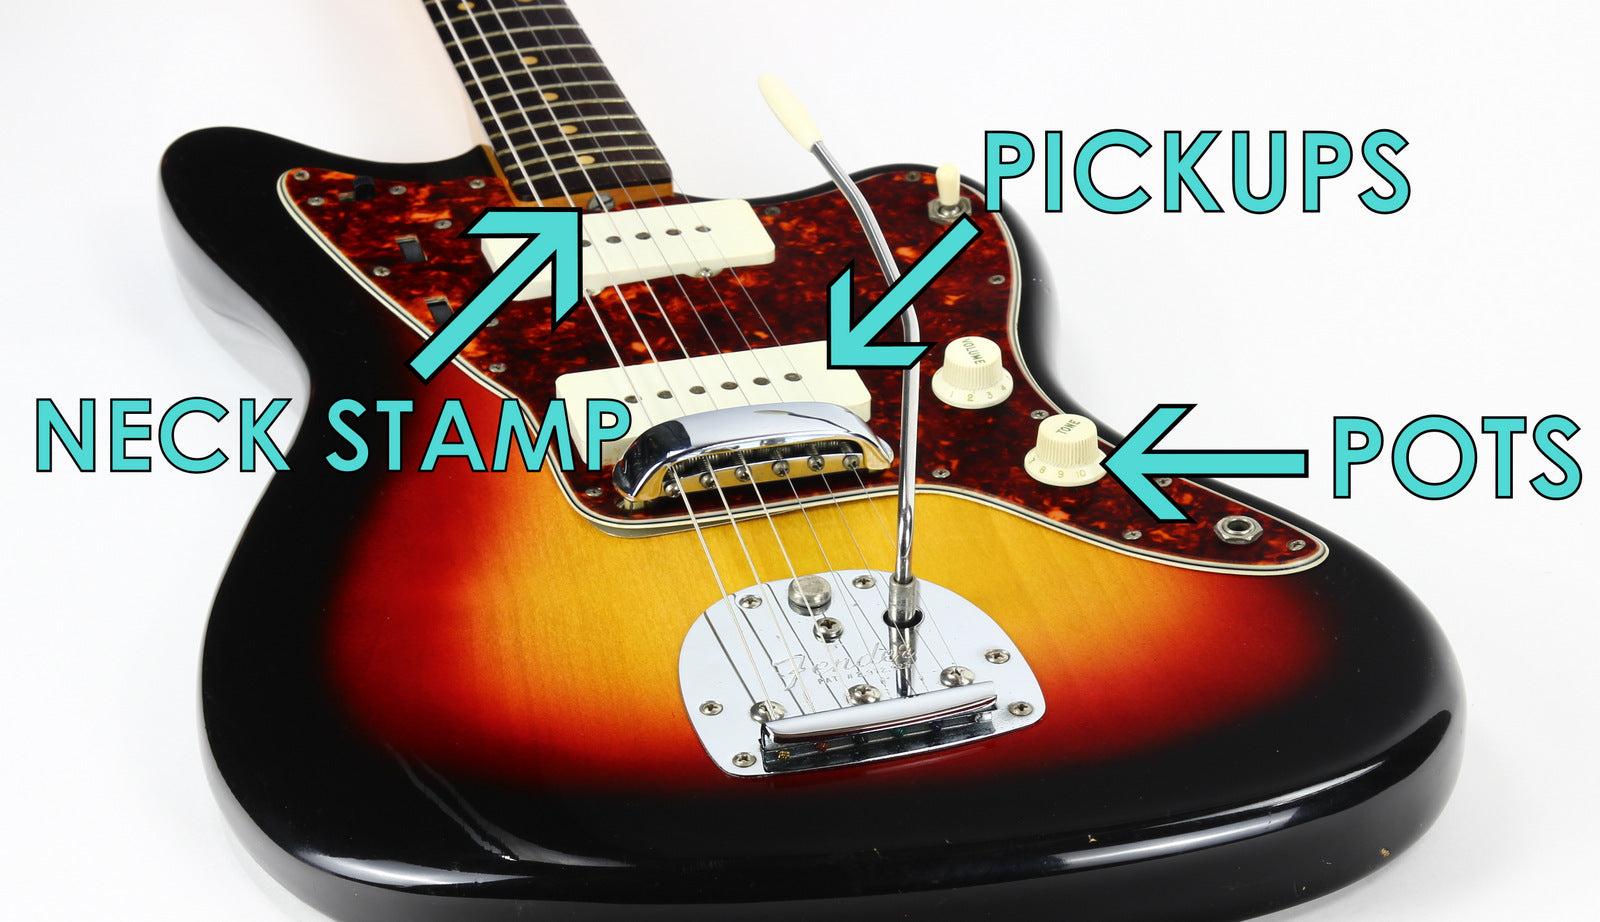 Locations of Fender date codes including neck stamp pot codes and pickup dates